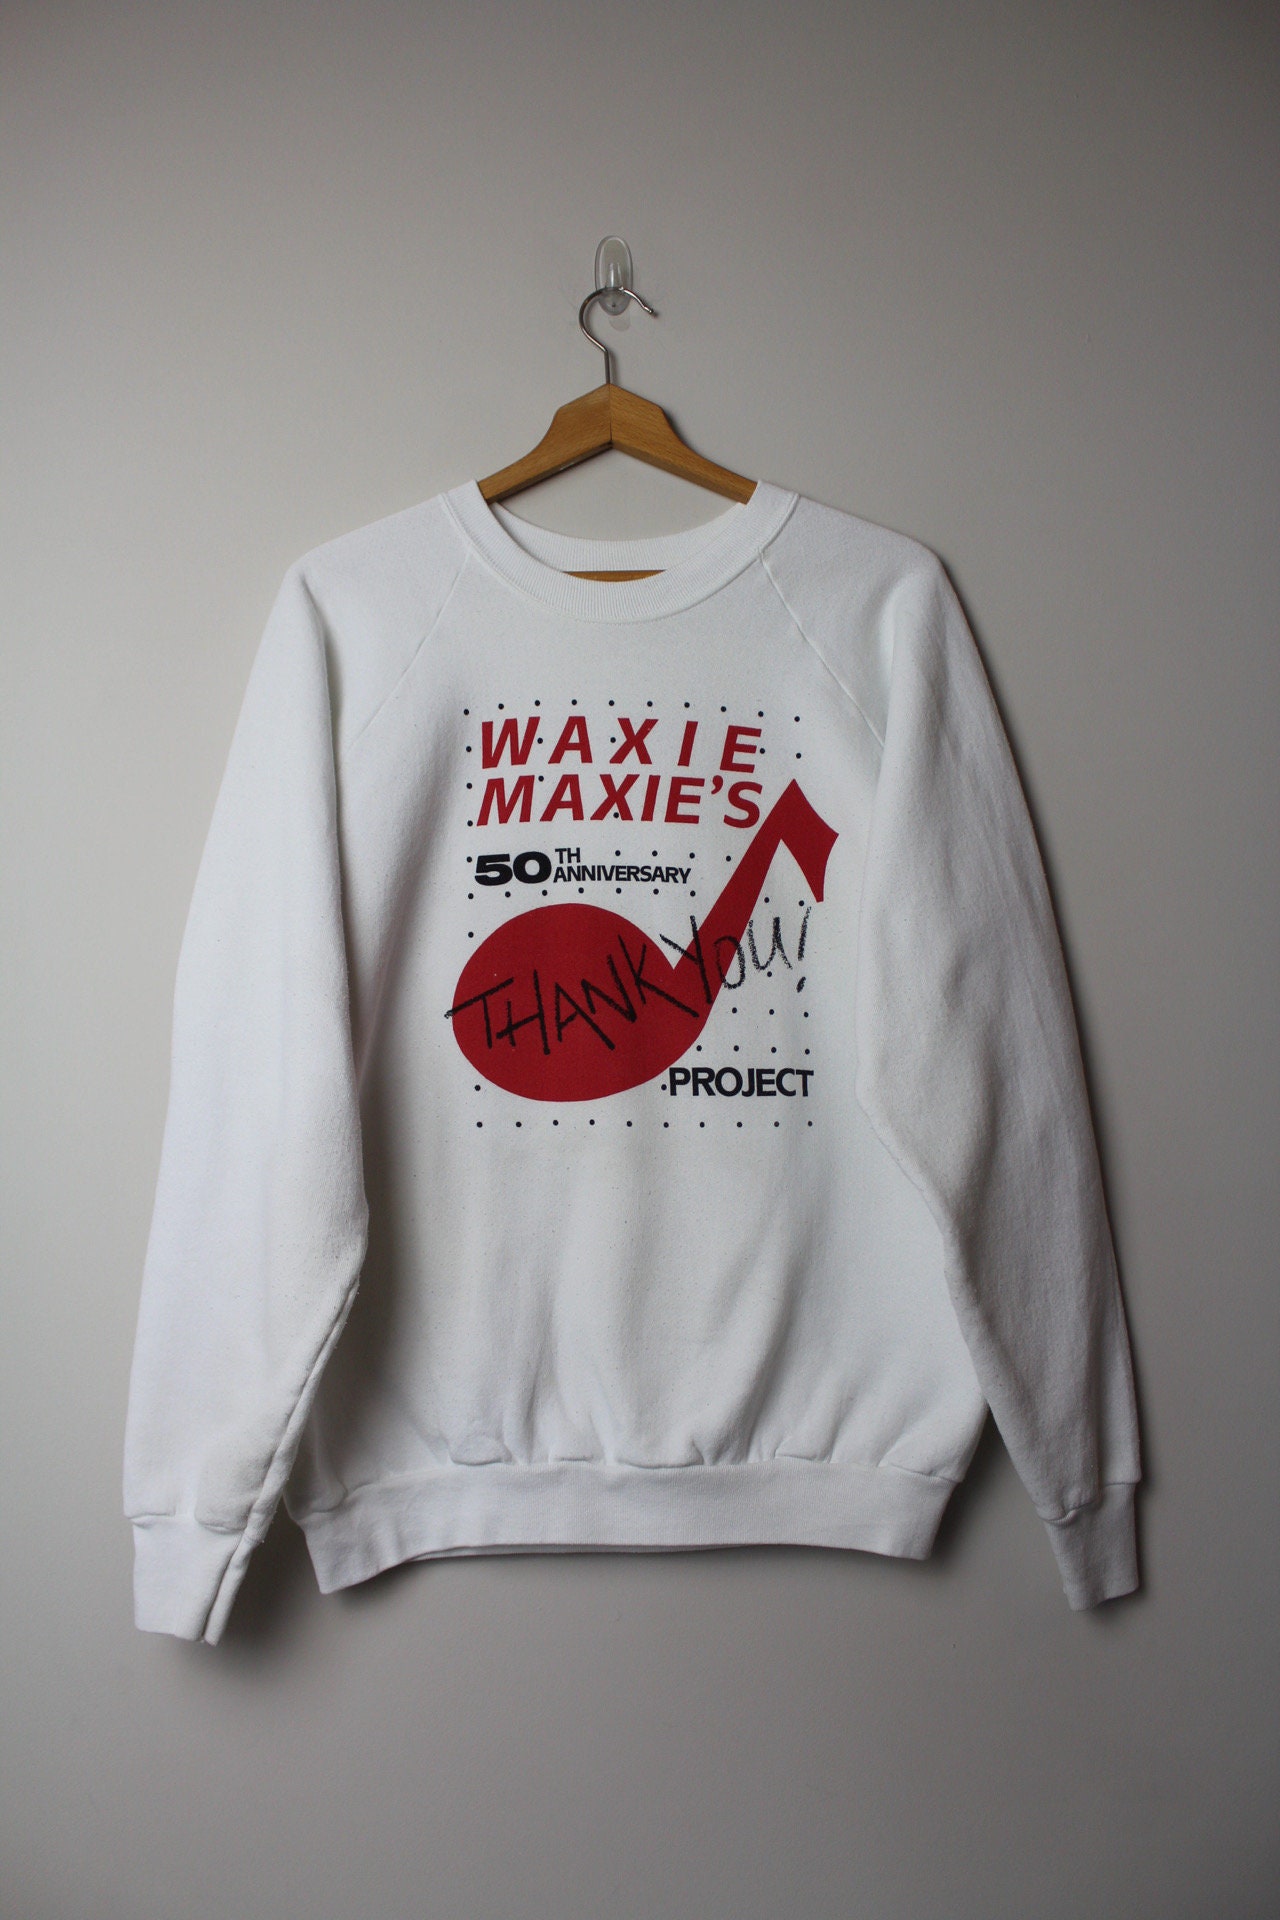 Buy Vintage Waxie Maxie's Record Store 50th Anniversary Graphic